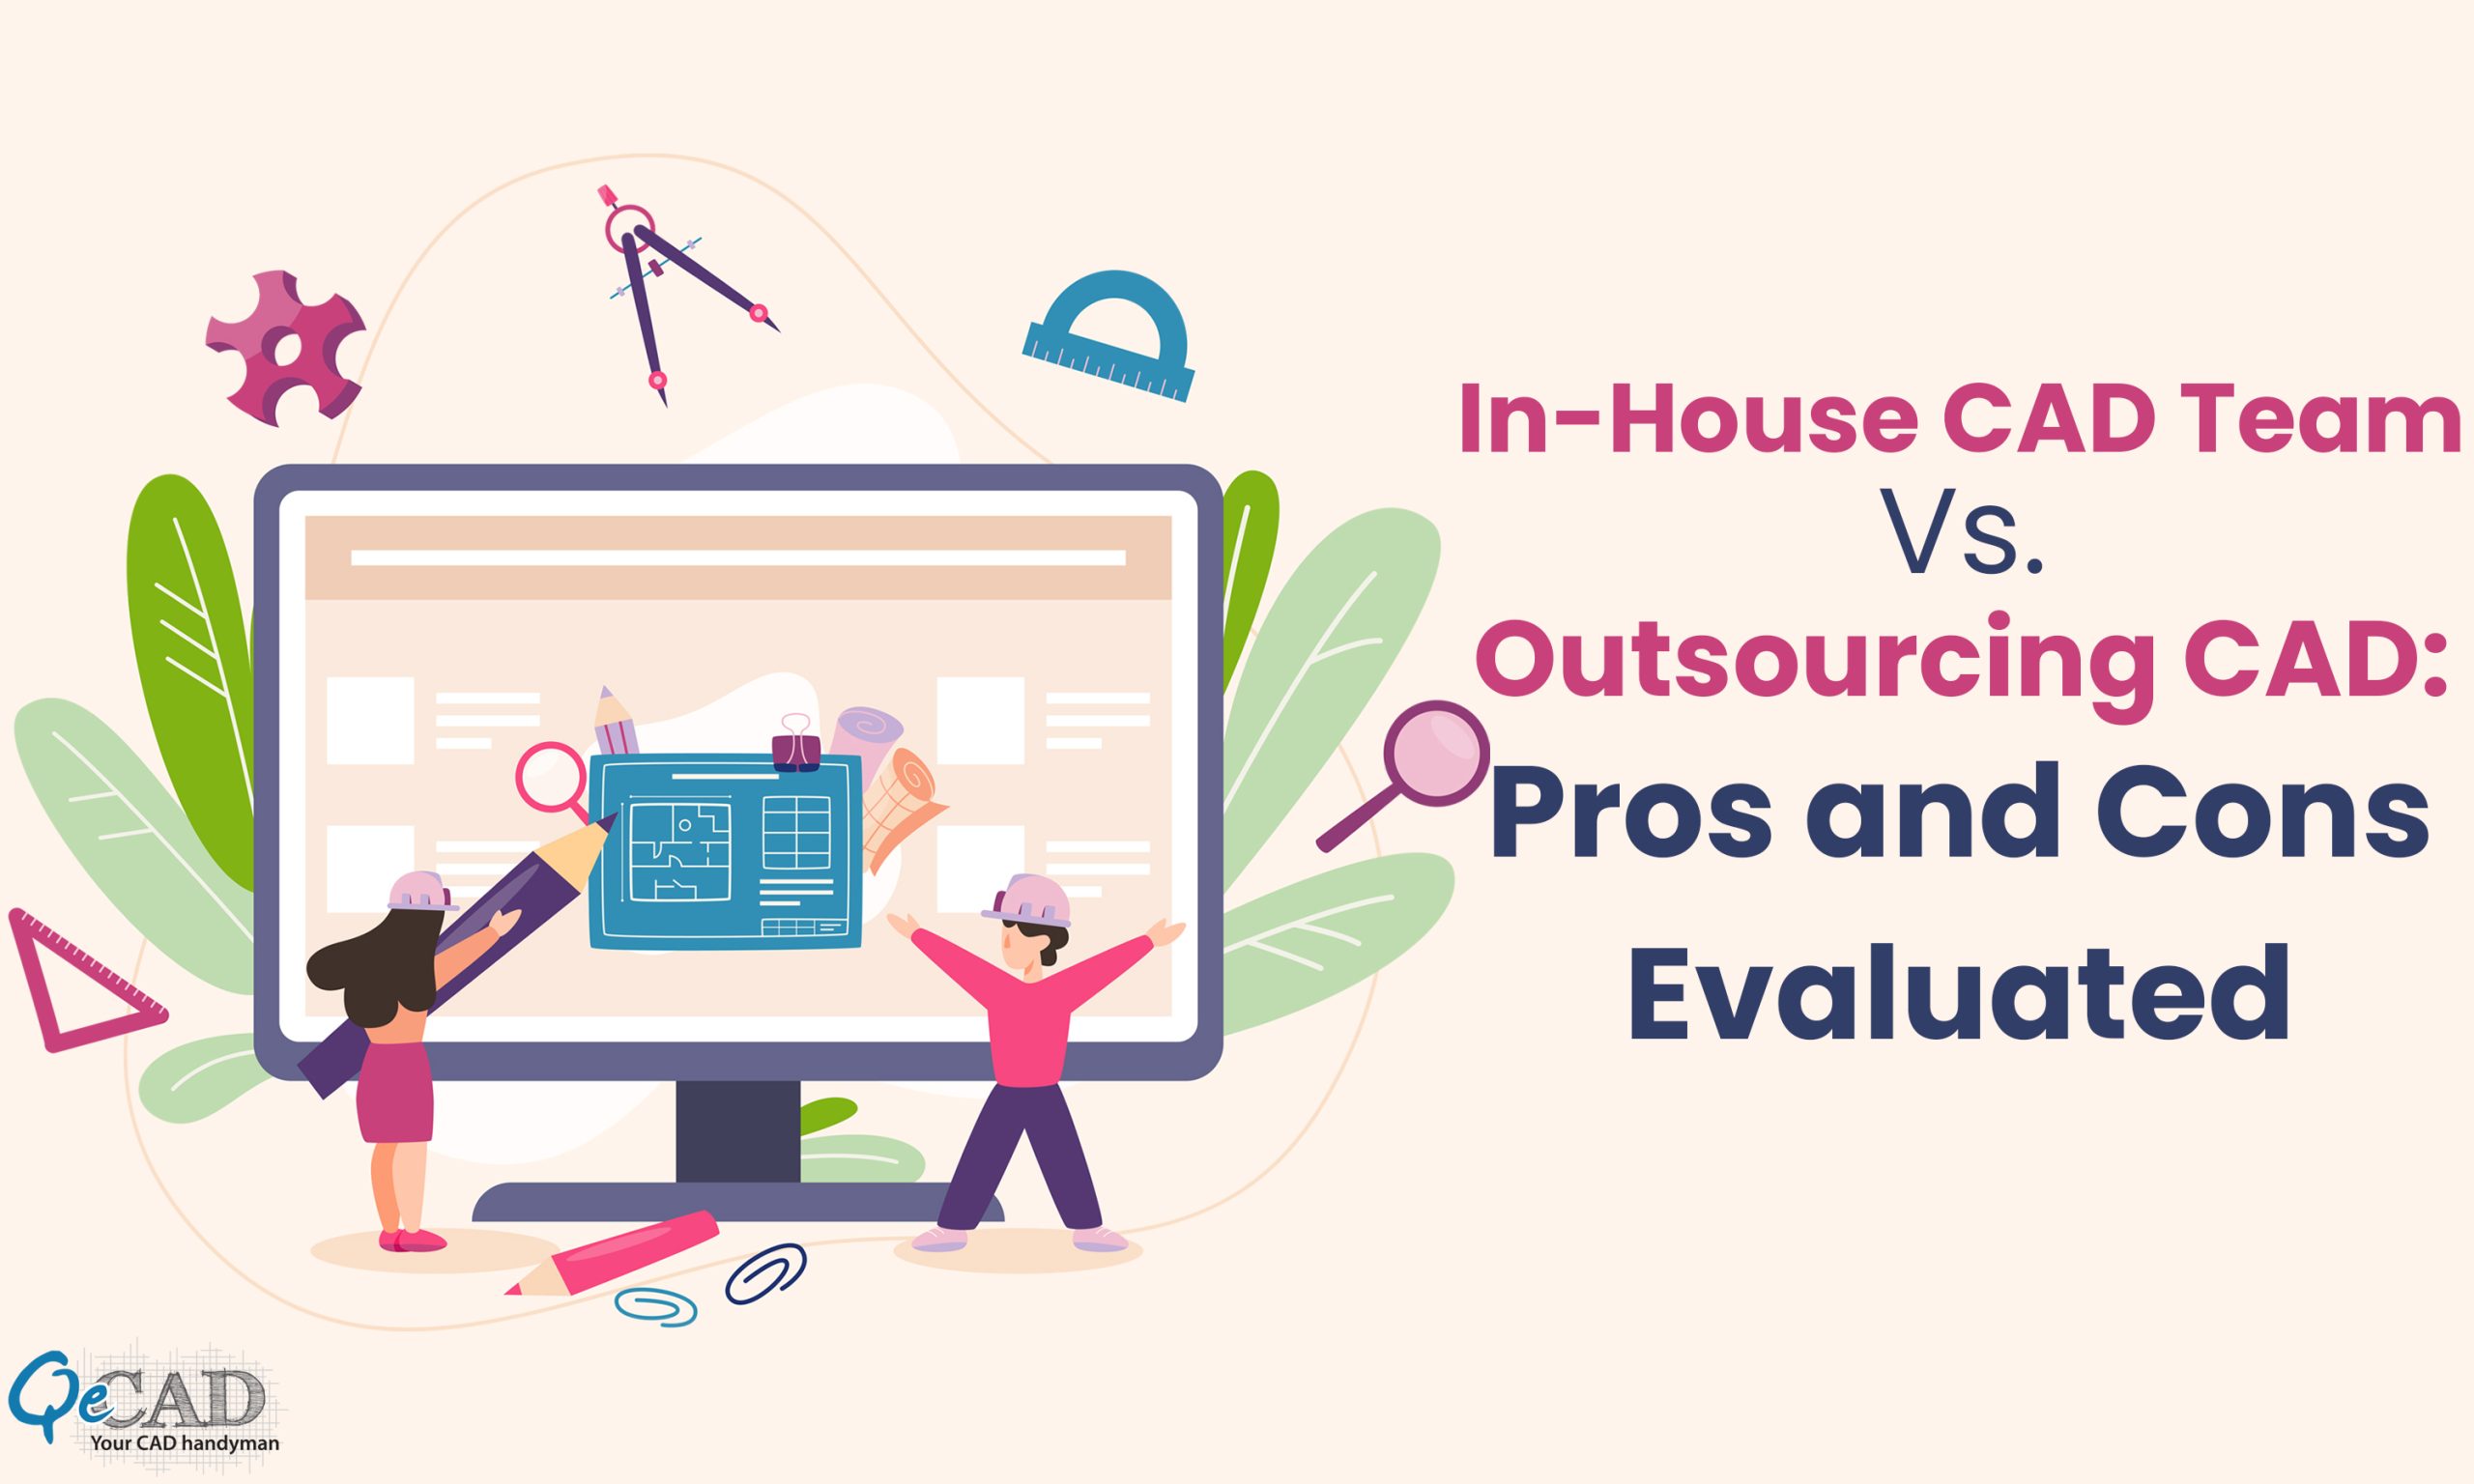 In-House CAD Team Vs. Outsourcing CAD: Pros and Cons Evaluated